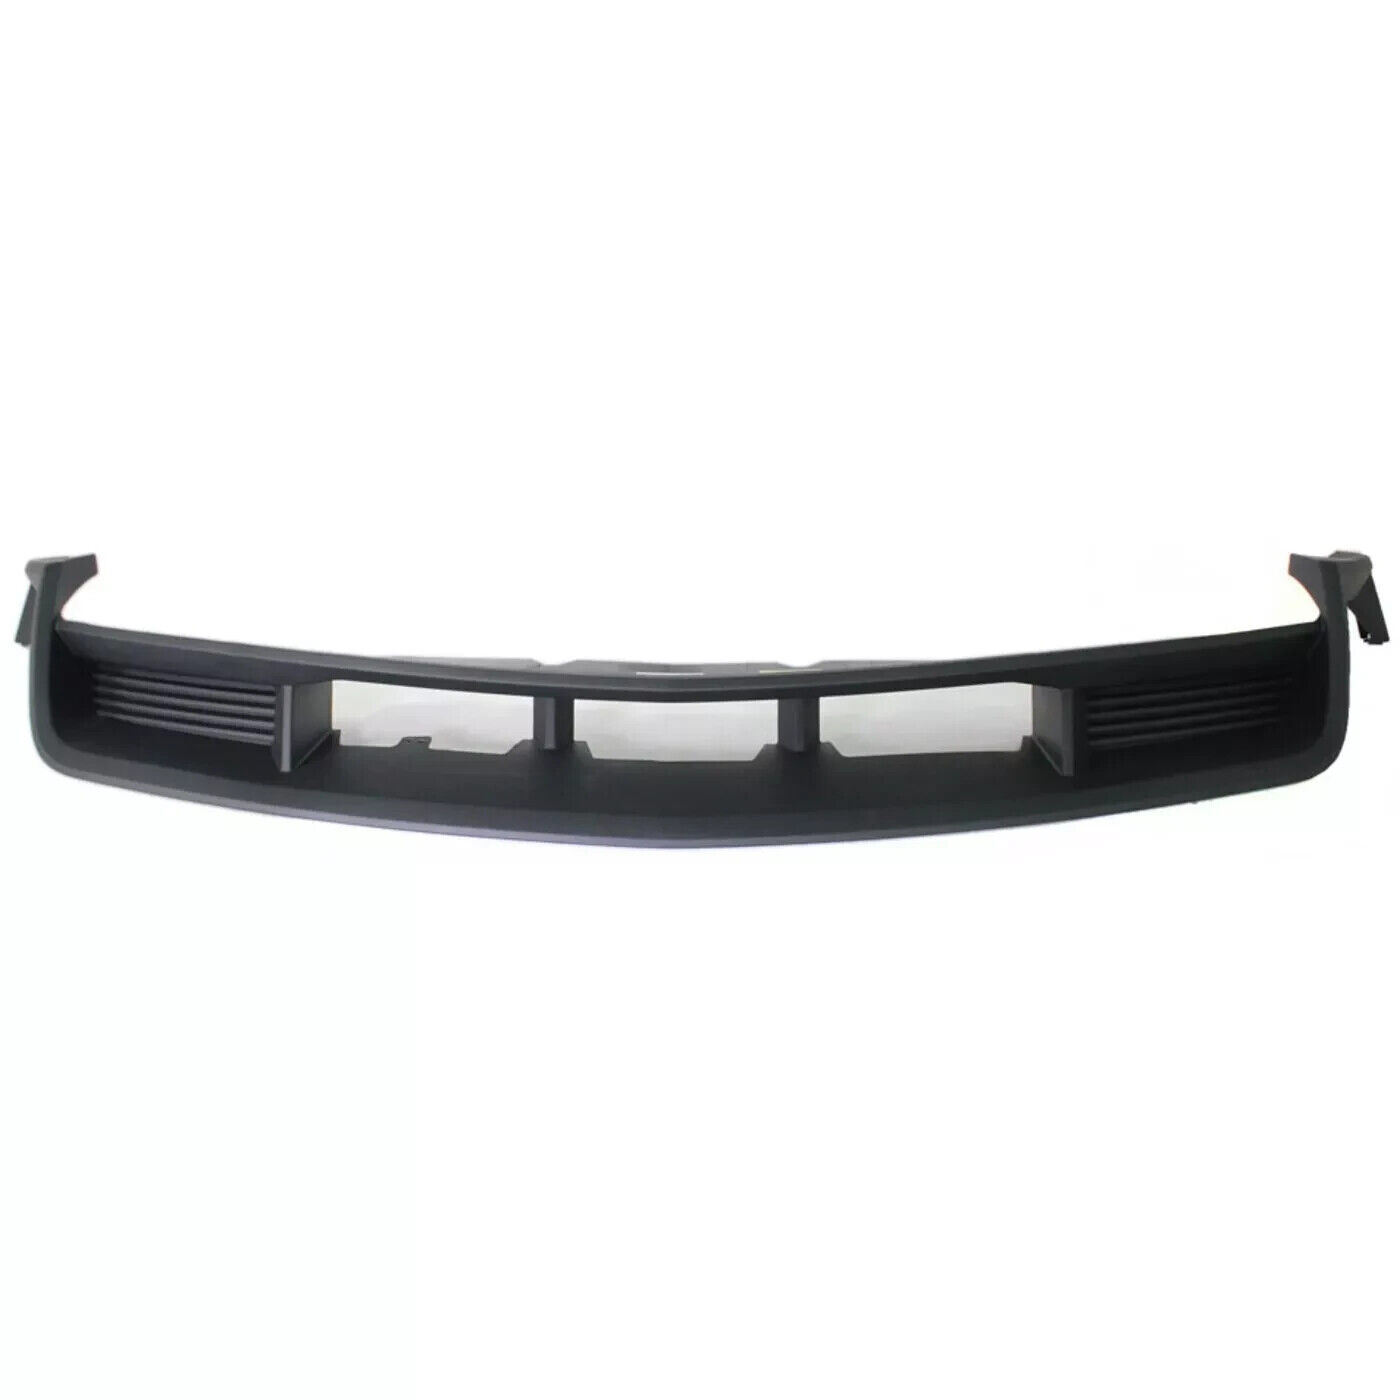 NEW Front Lower Valance For 2010-2012 Ford Mustang GT SHIPS TODAY